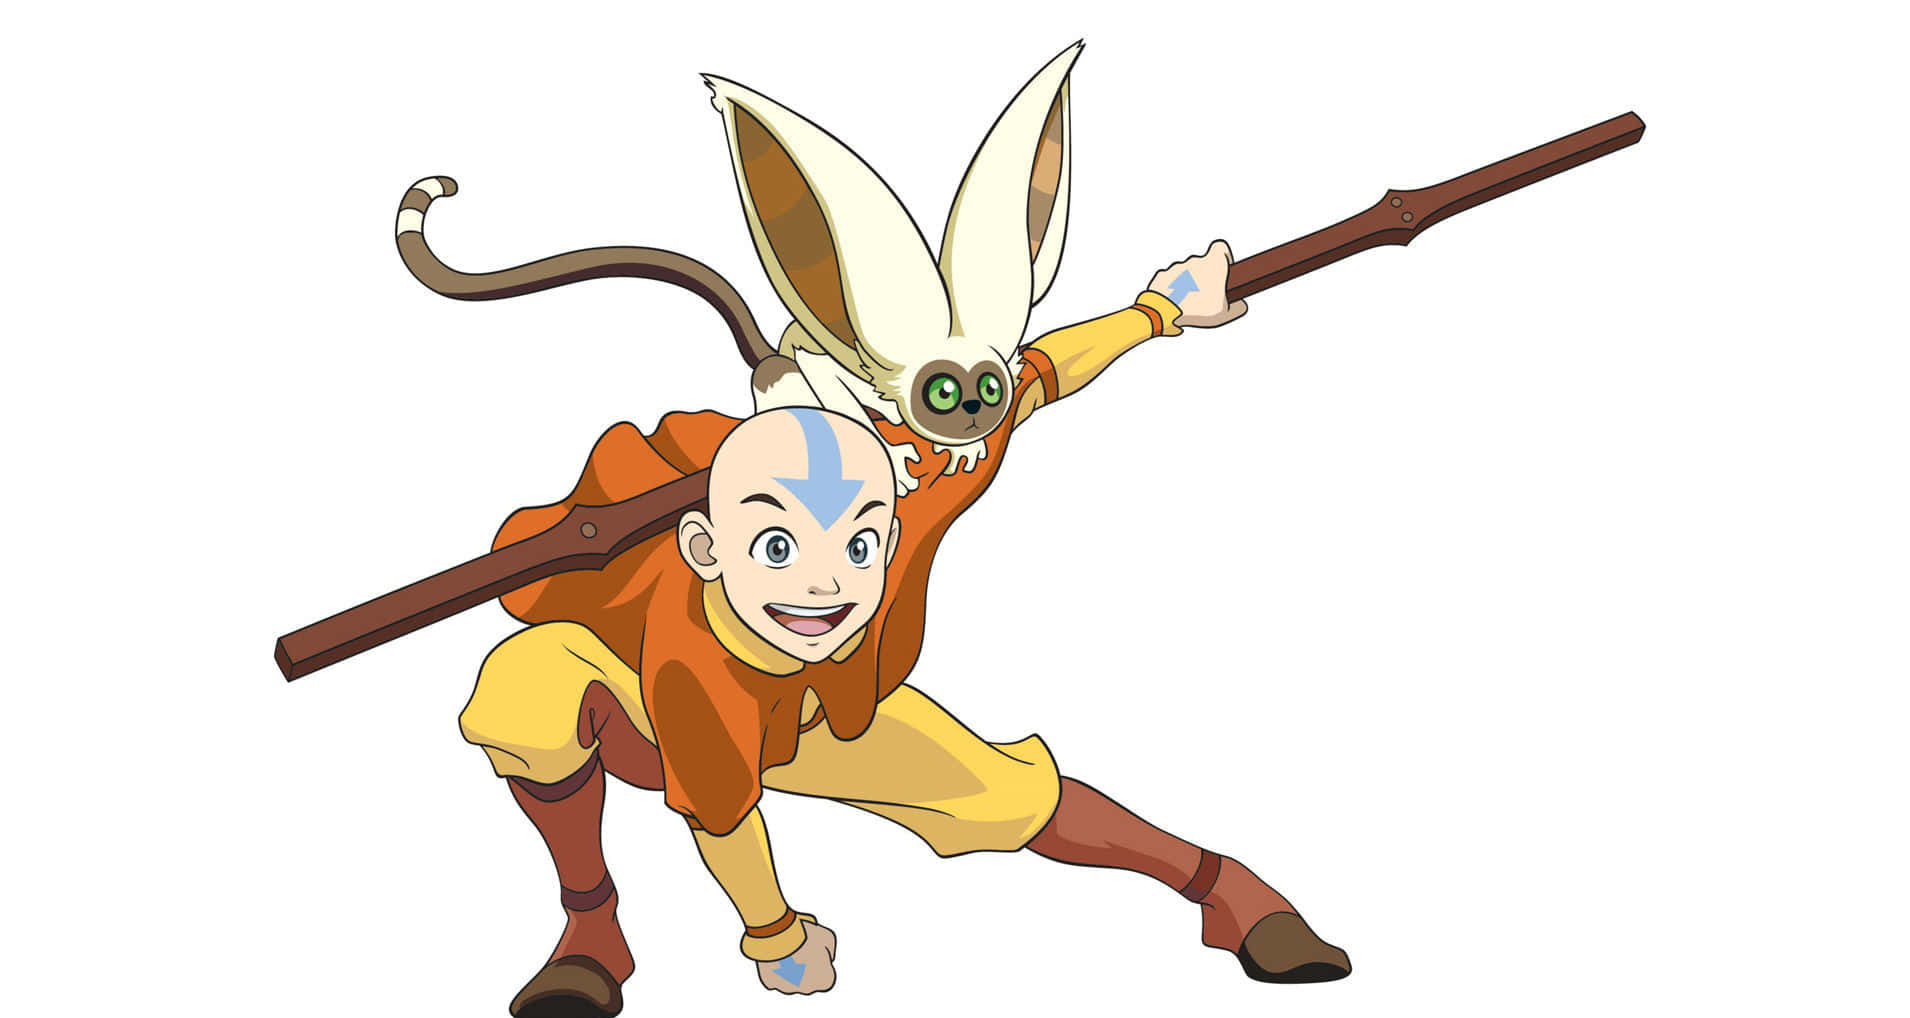 "avatar Aang, Master Of All Elements" Wallpaper